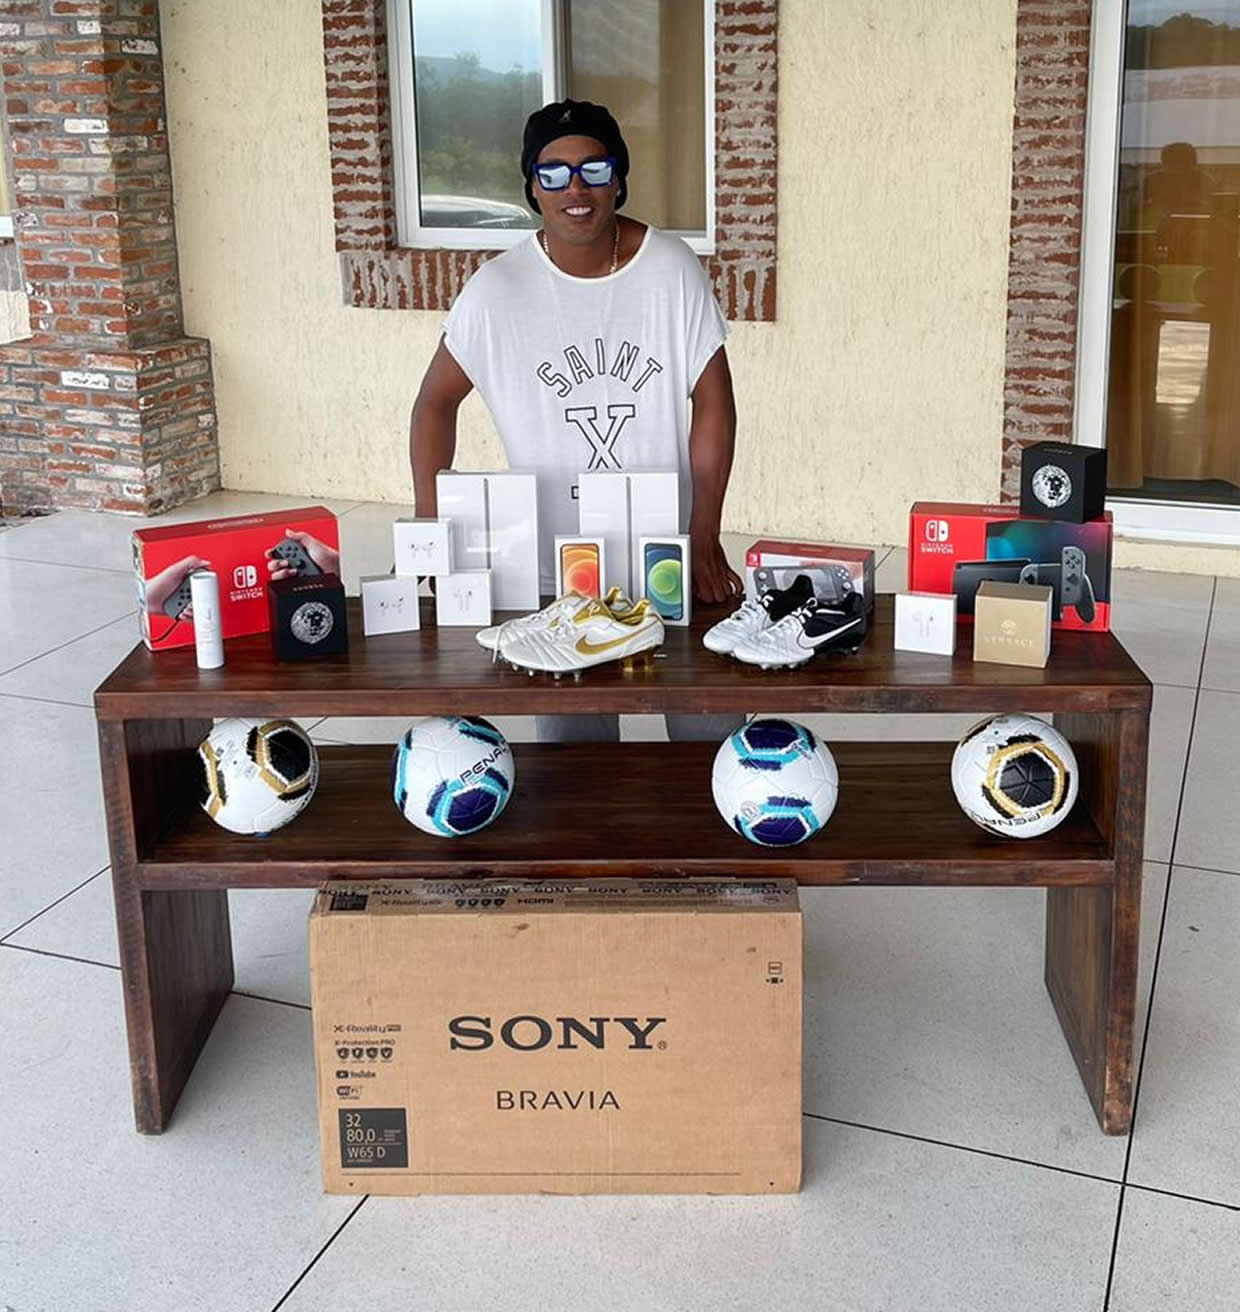 Ronaldinho giveaway campaign for one of our clients from Europe